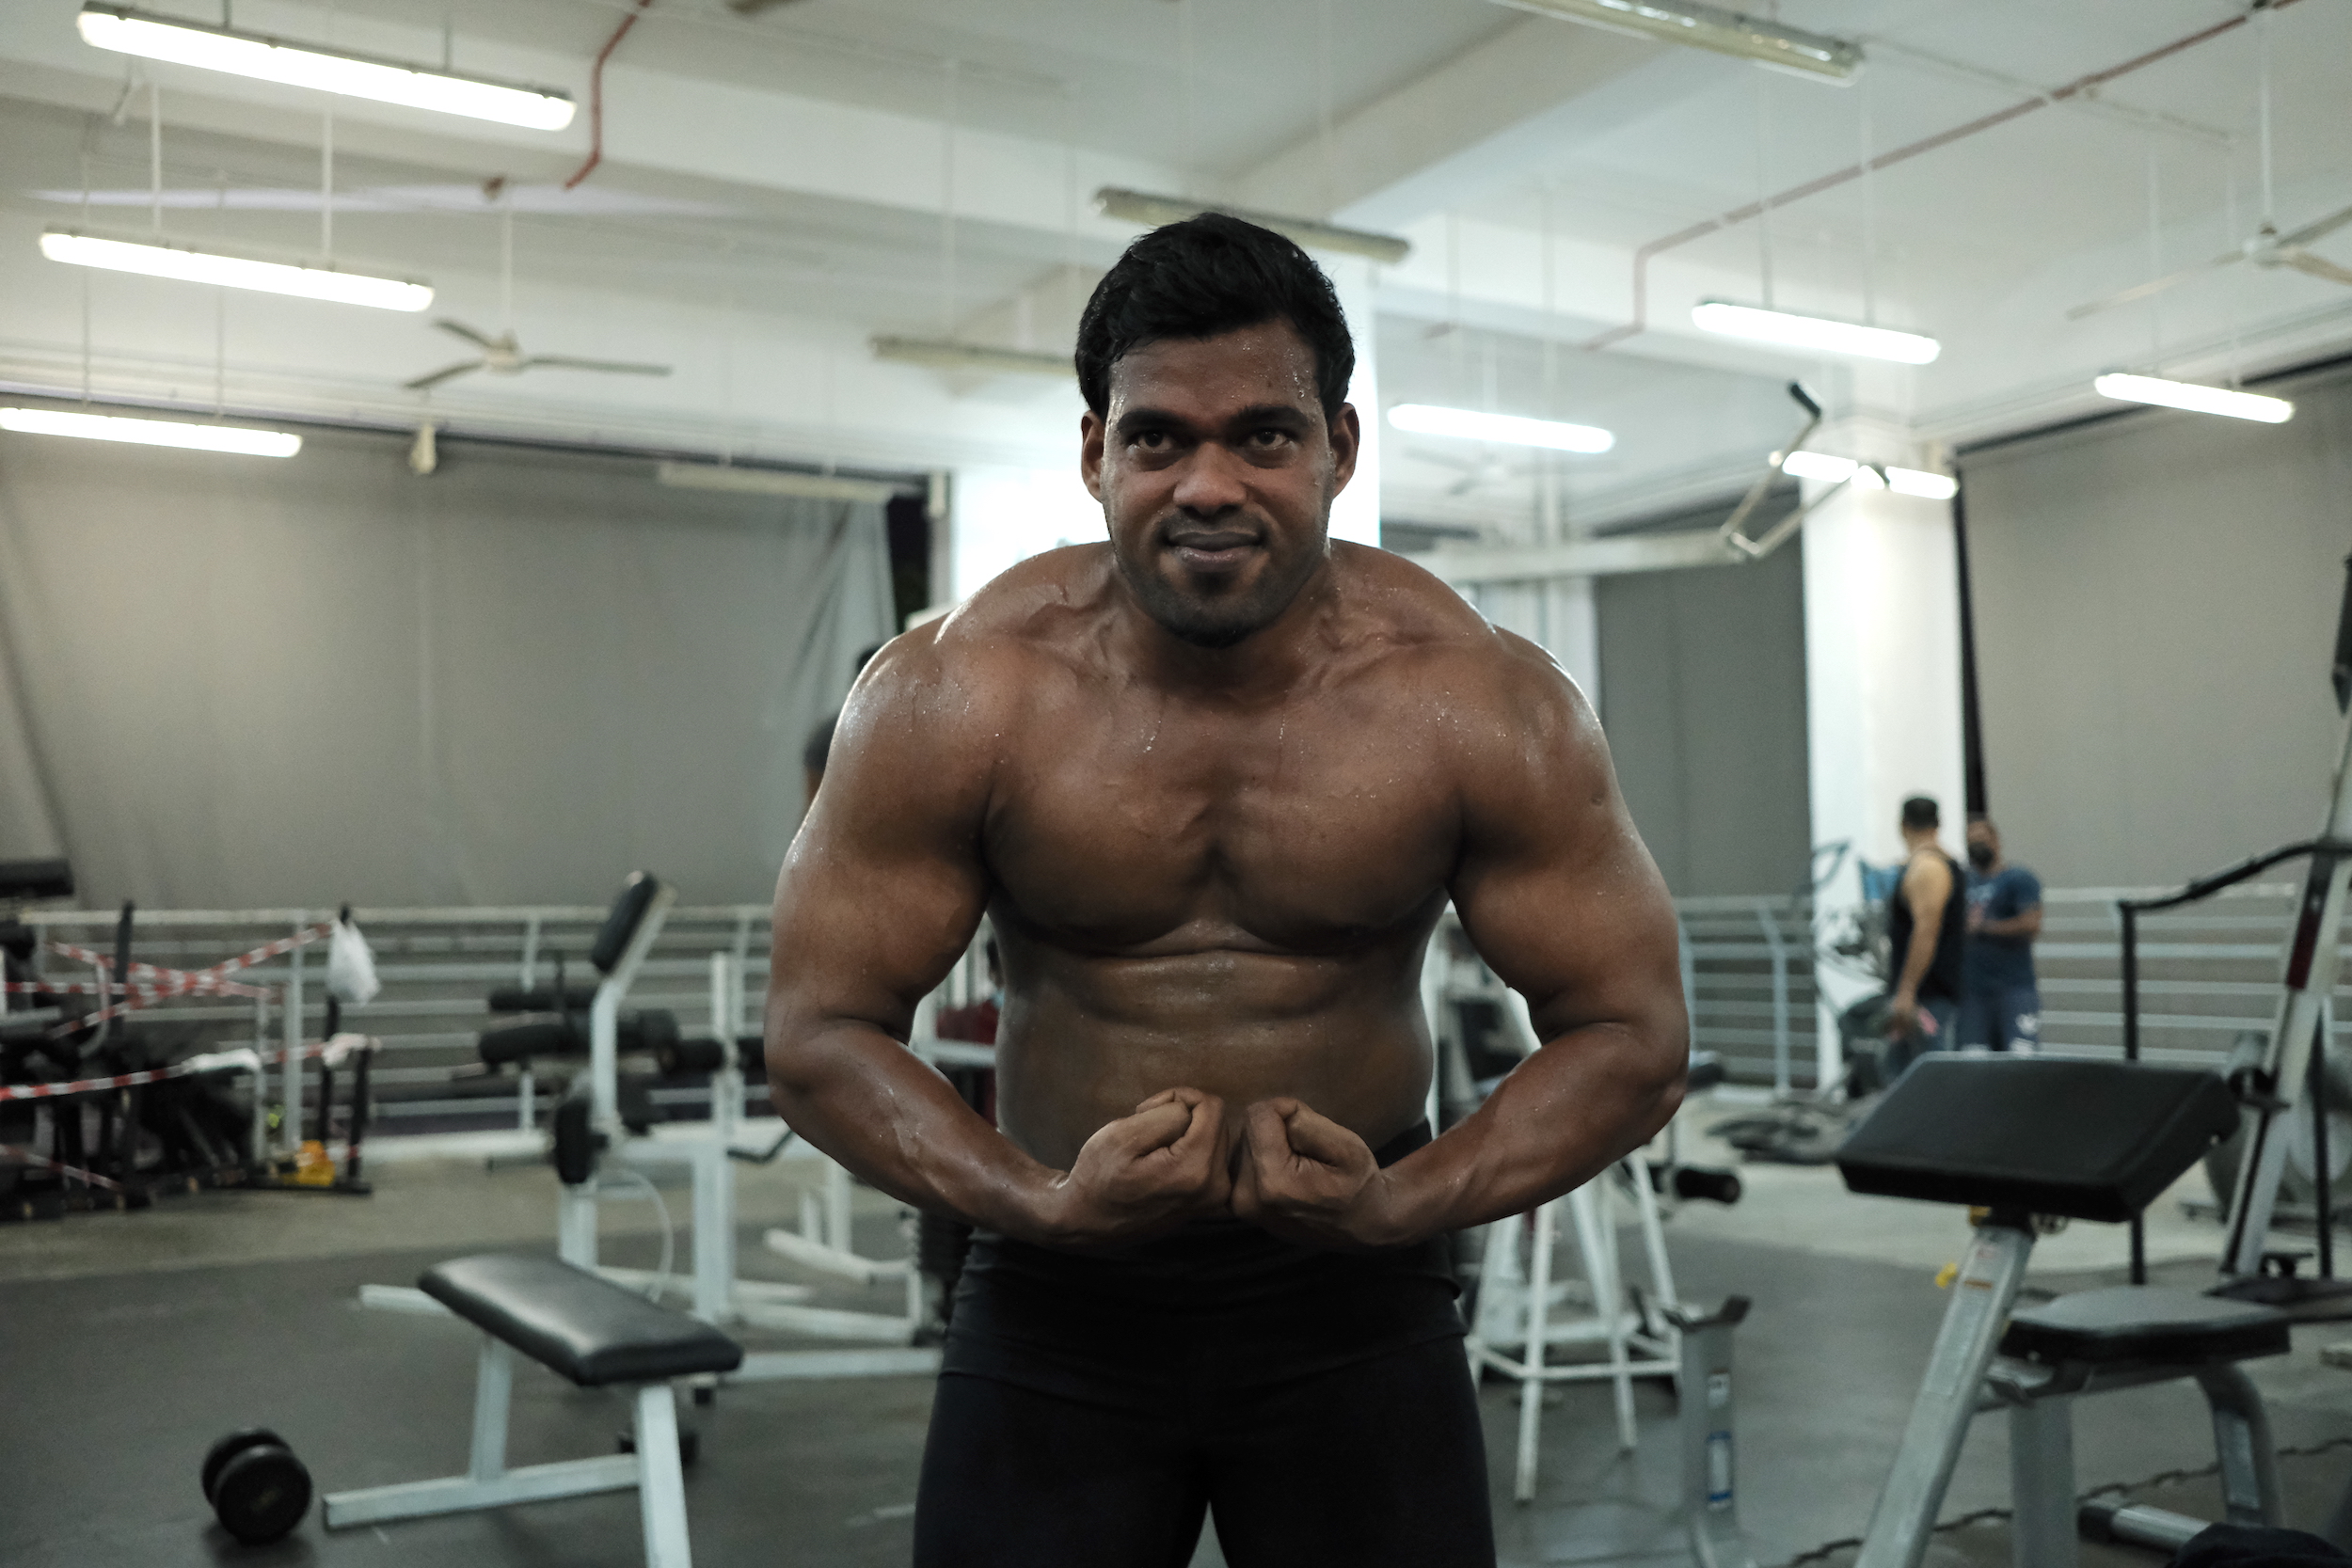 Image of Murugesan as he works out